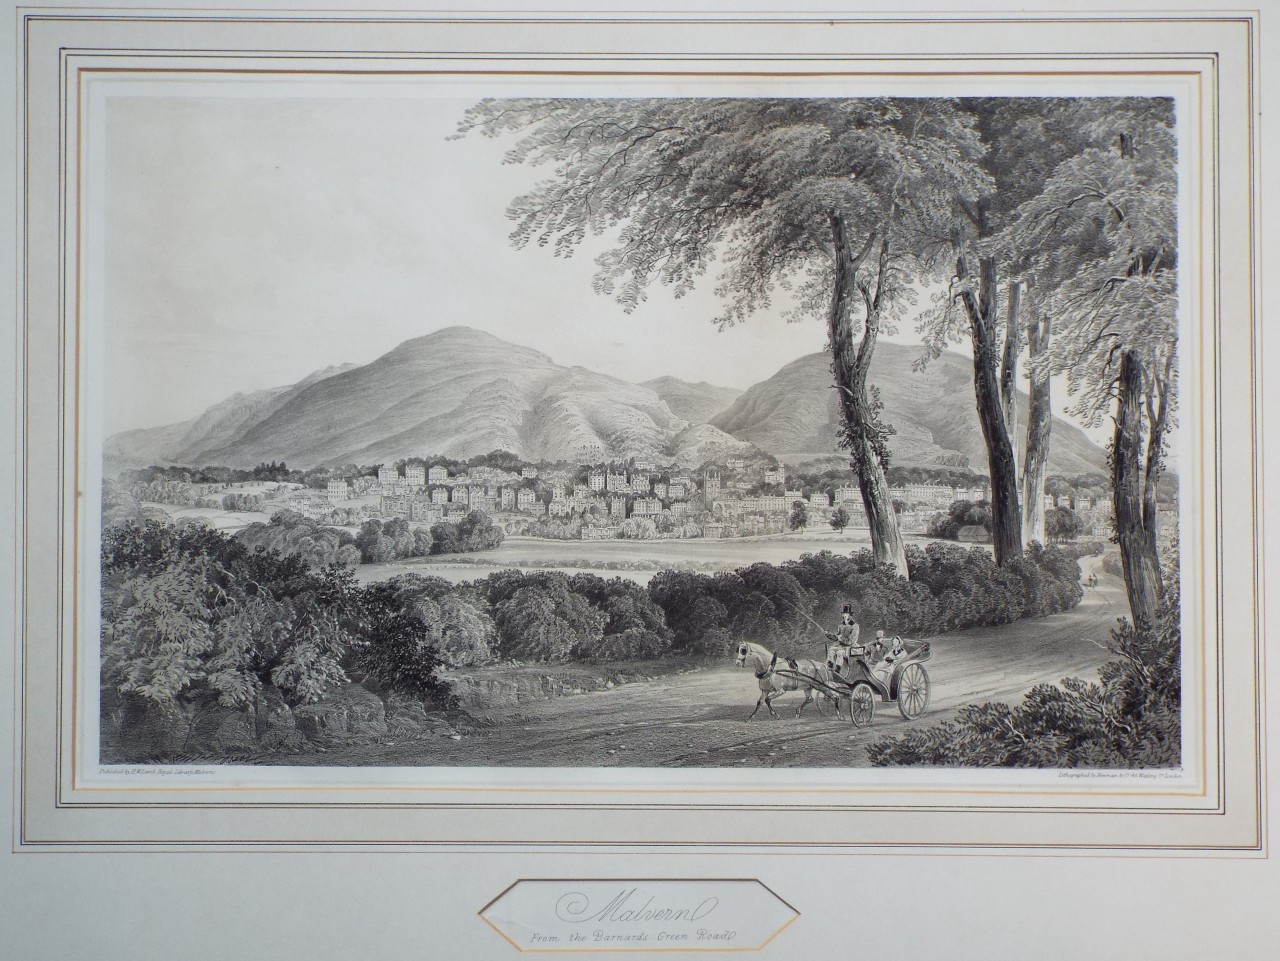 Lithograph - Malvern from the Barnards Green Road - Newman